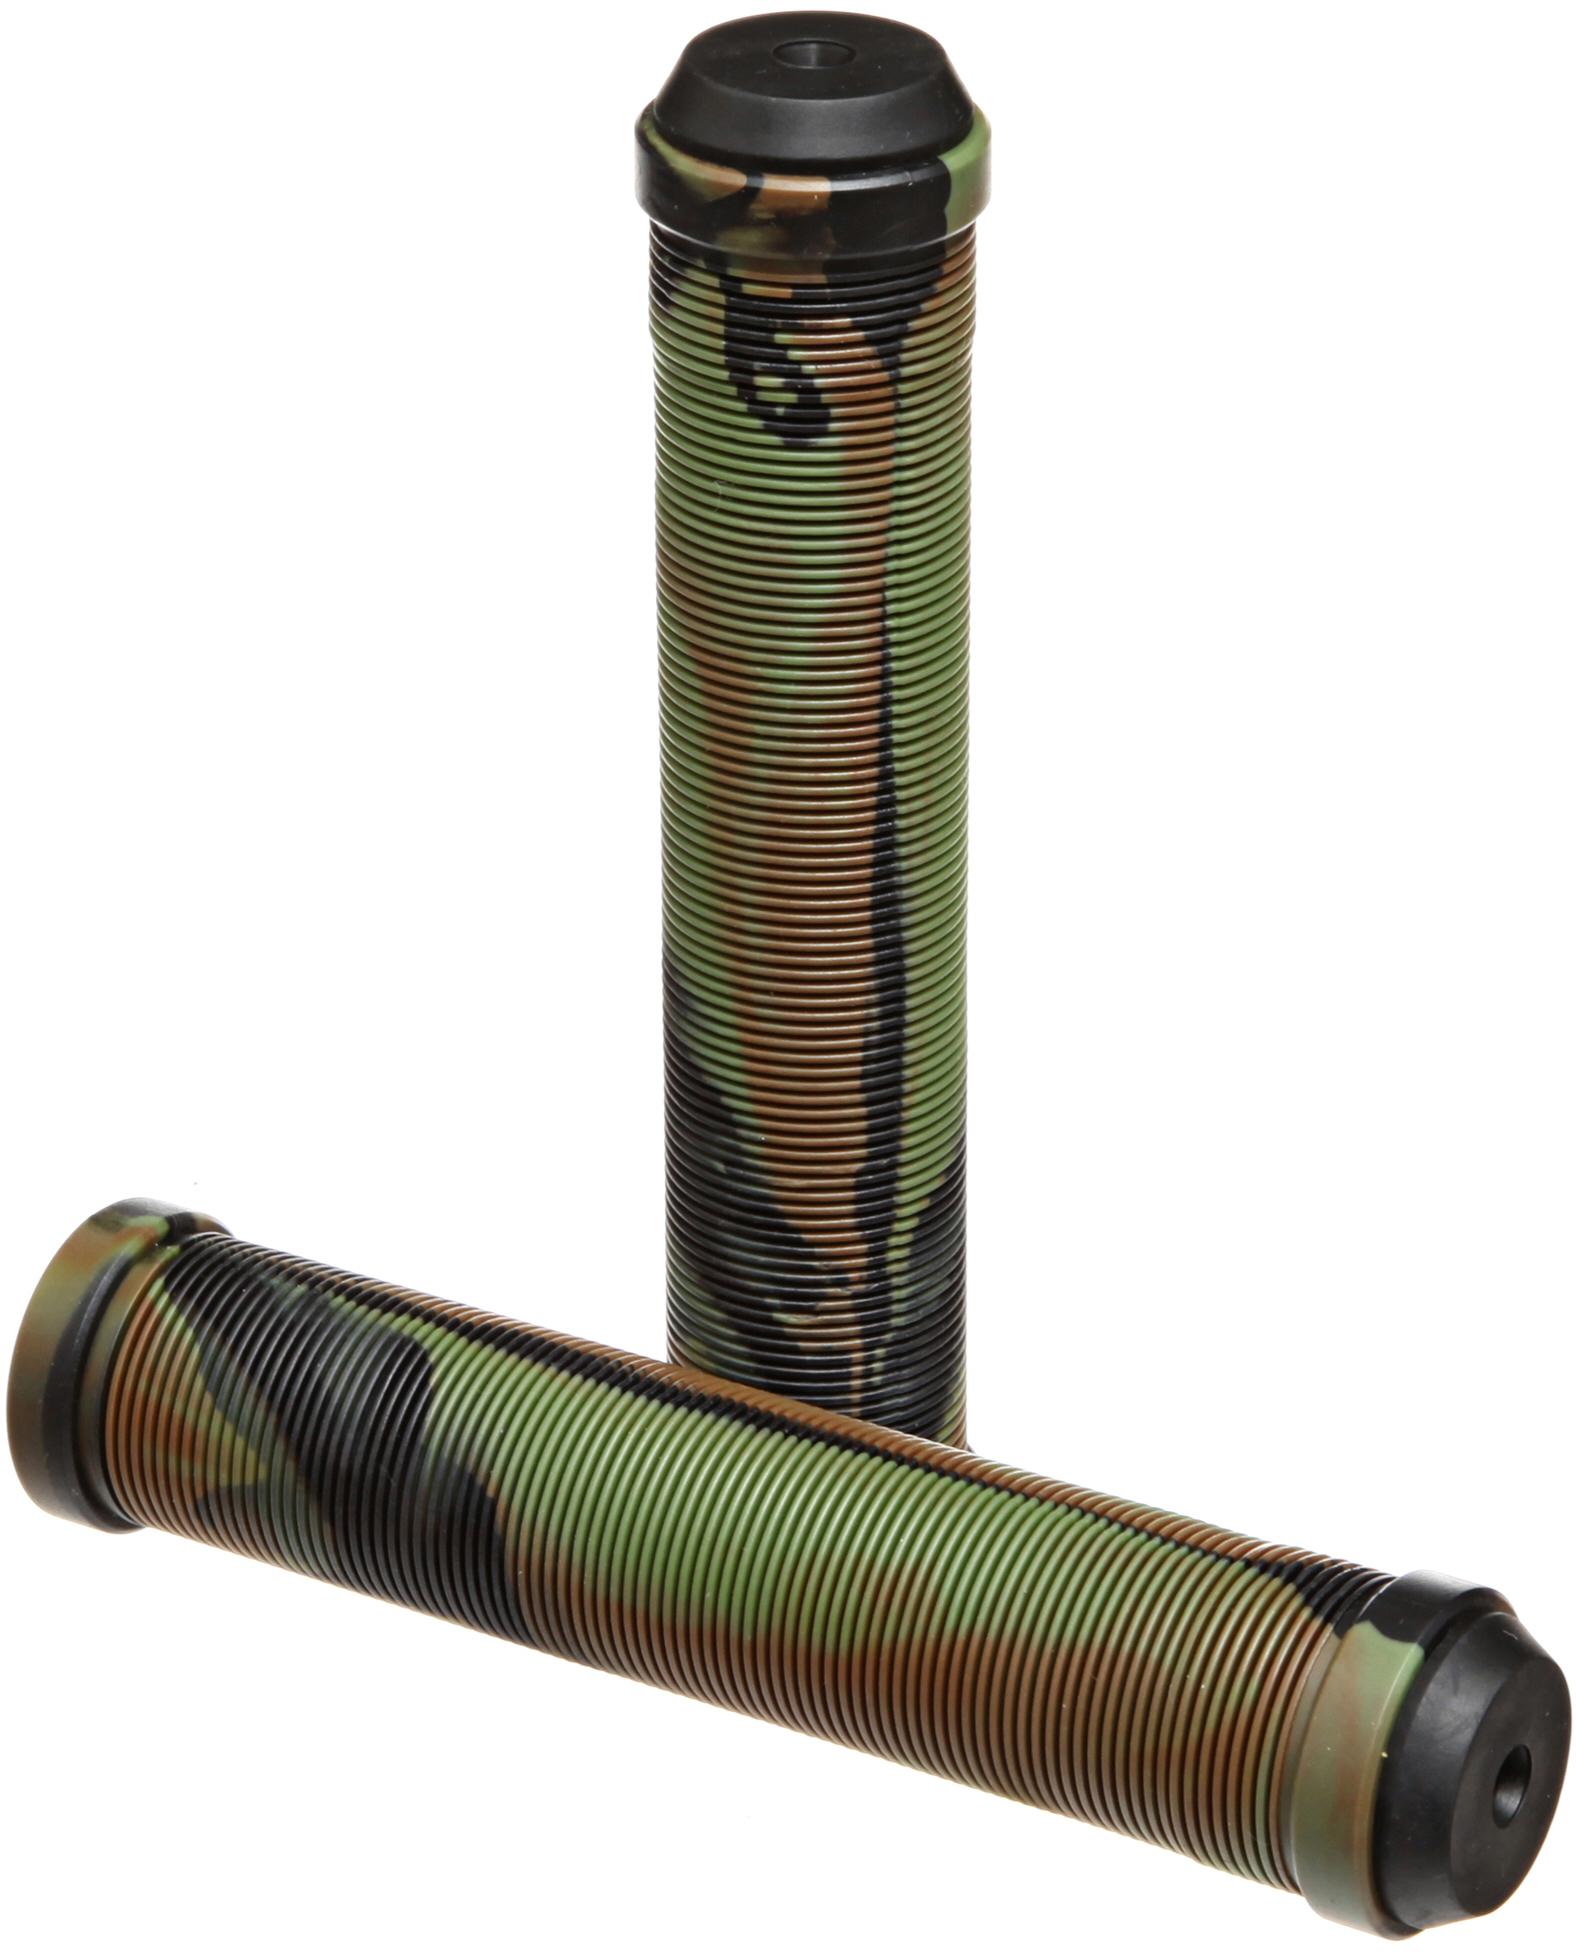 Seal Bmx Switch Grips - Limited Edition - Camo